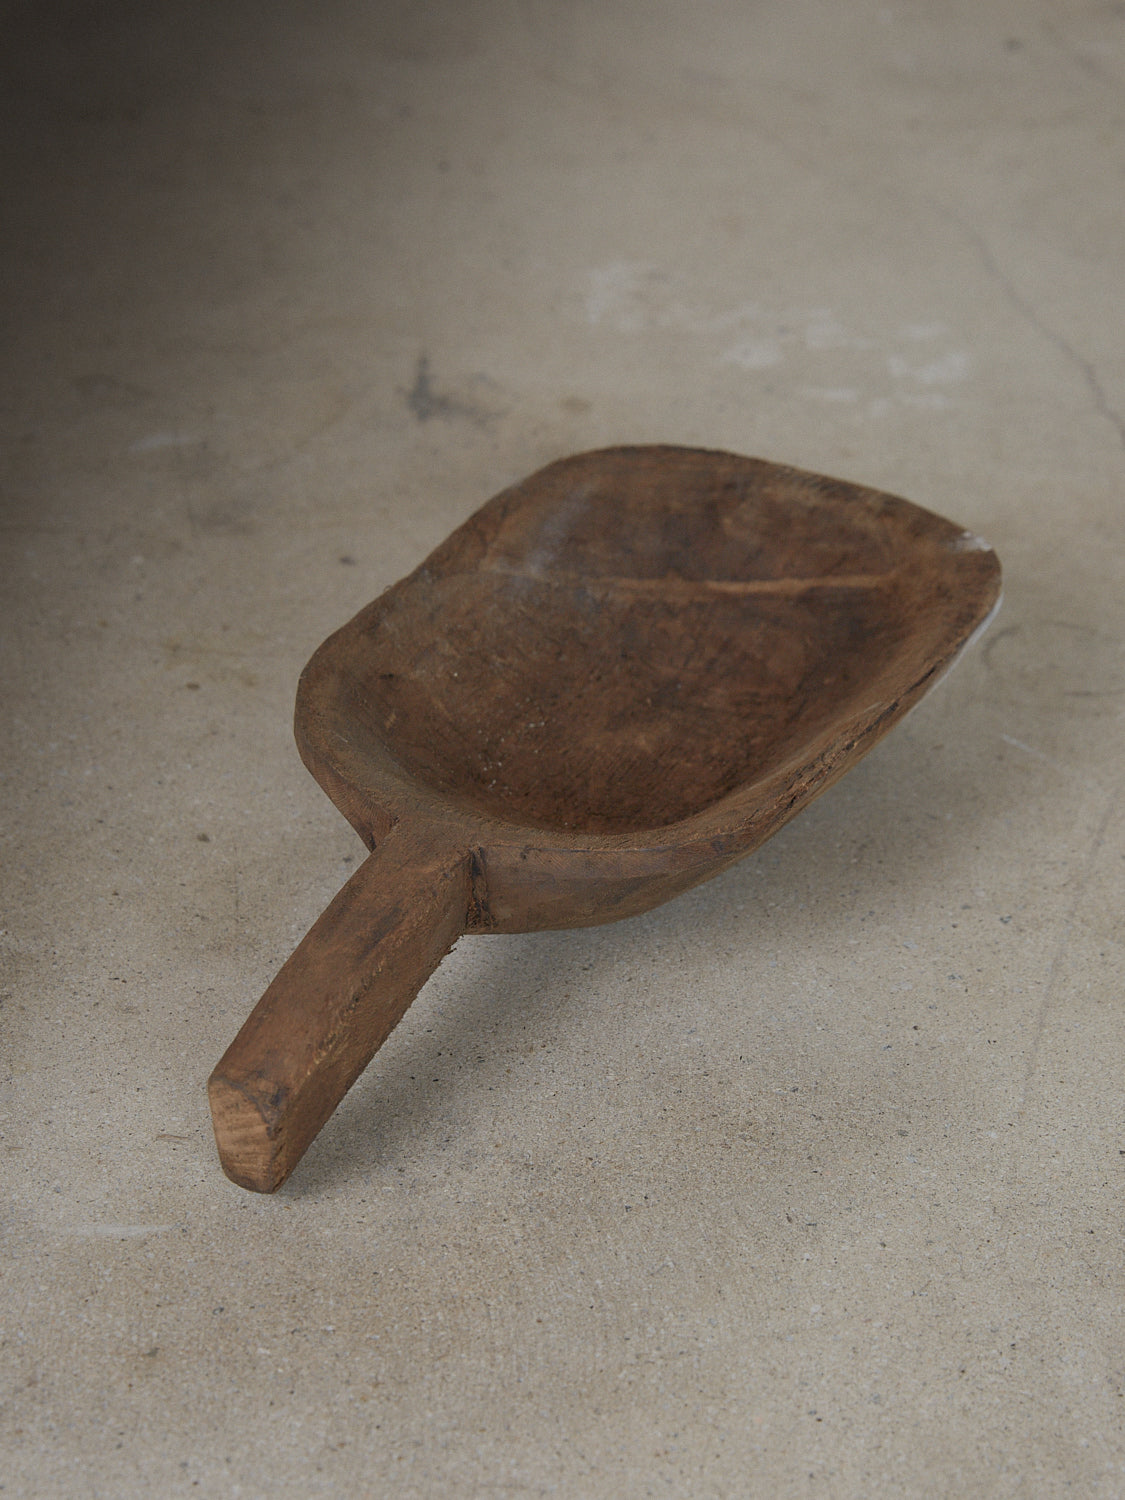 Vintage Grain Scoop. Rare find. Raw, wide African grain scoop with gently arched handle and curved rectangular bowl